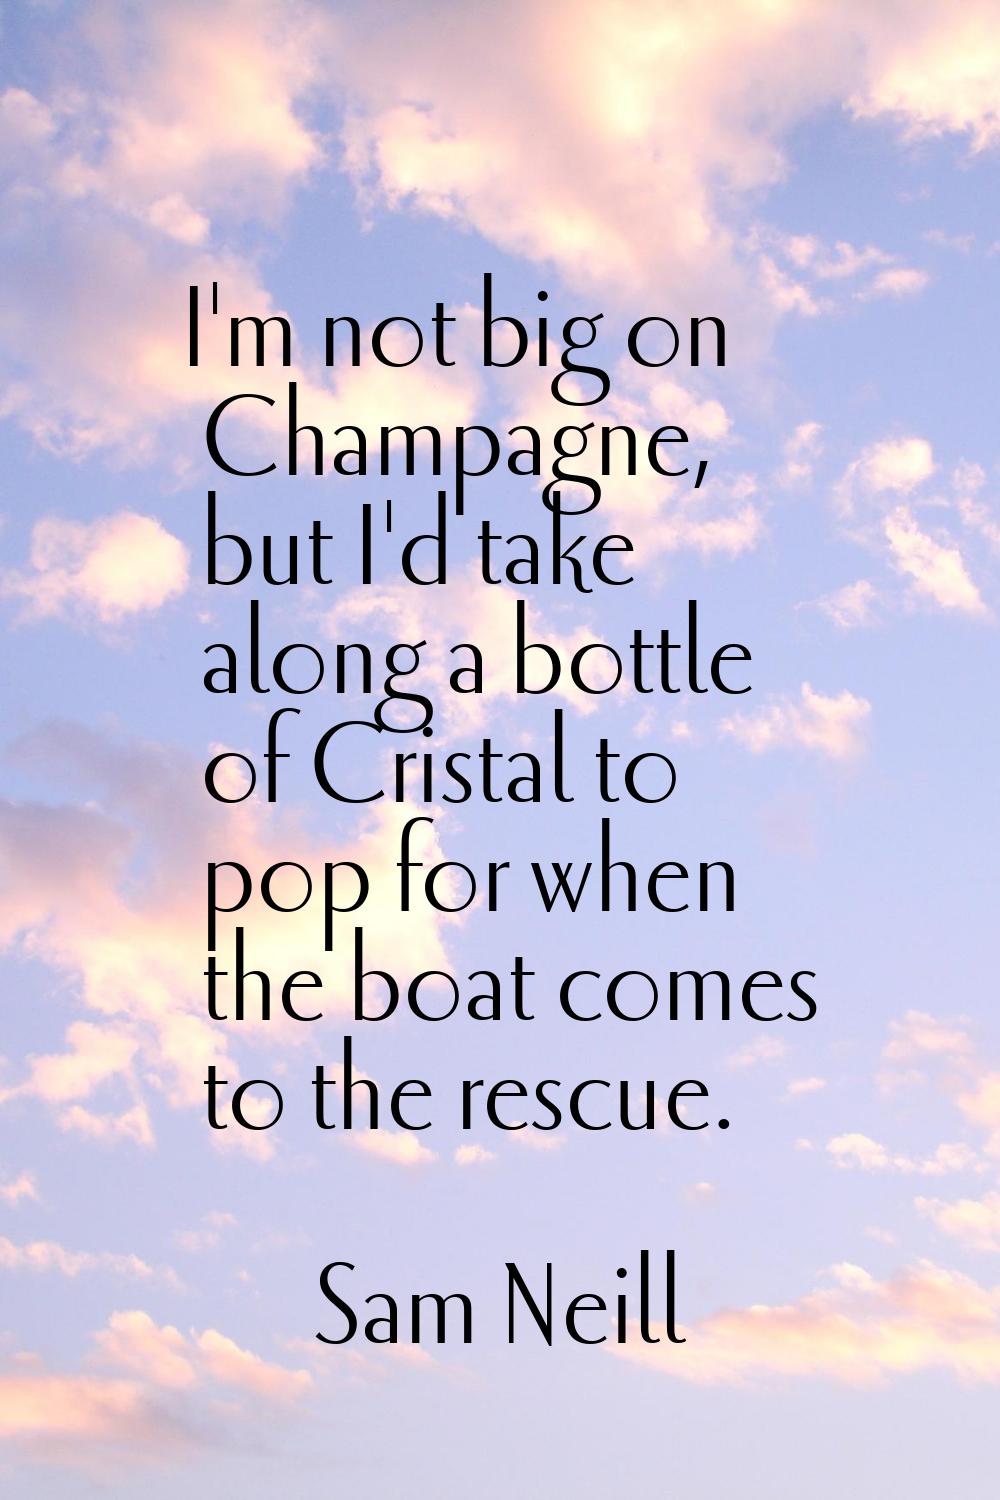 I'm not big on Champagne, but I'd take along a bottle of Cristal to pop for when the boat comes to 